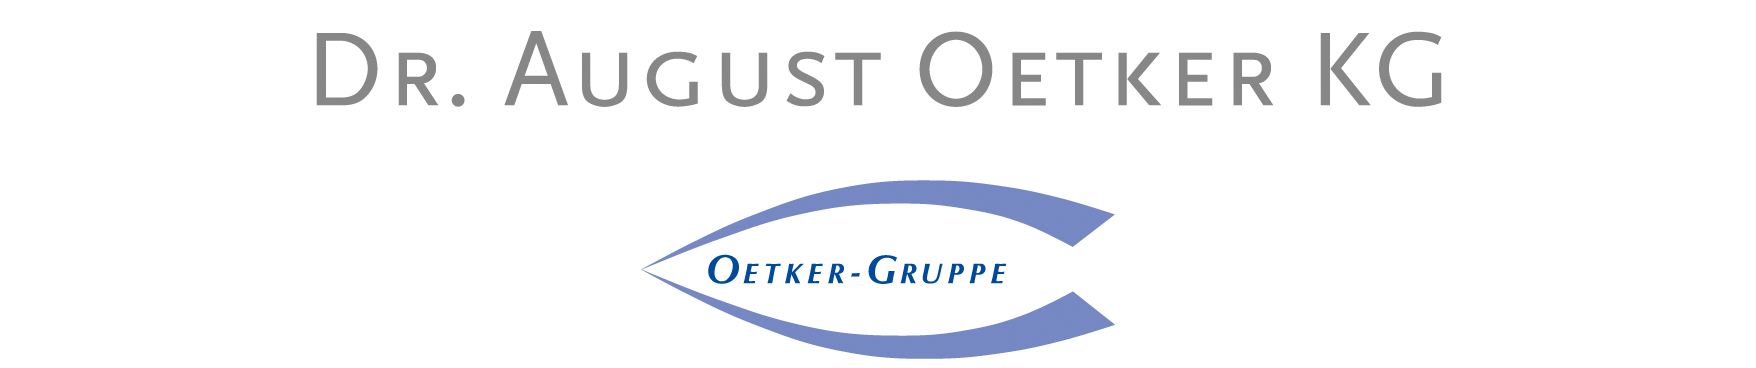 Picture - Oetker Group